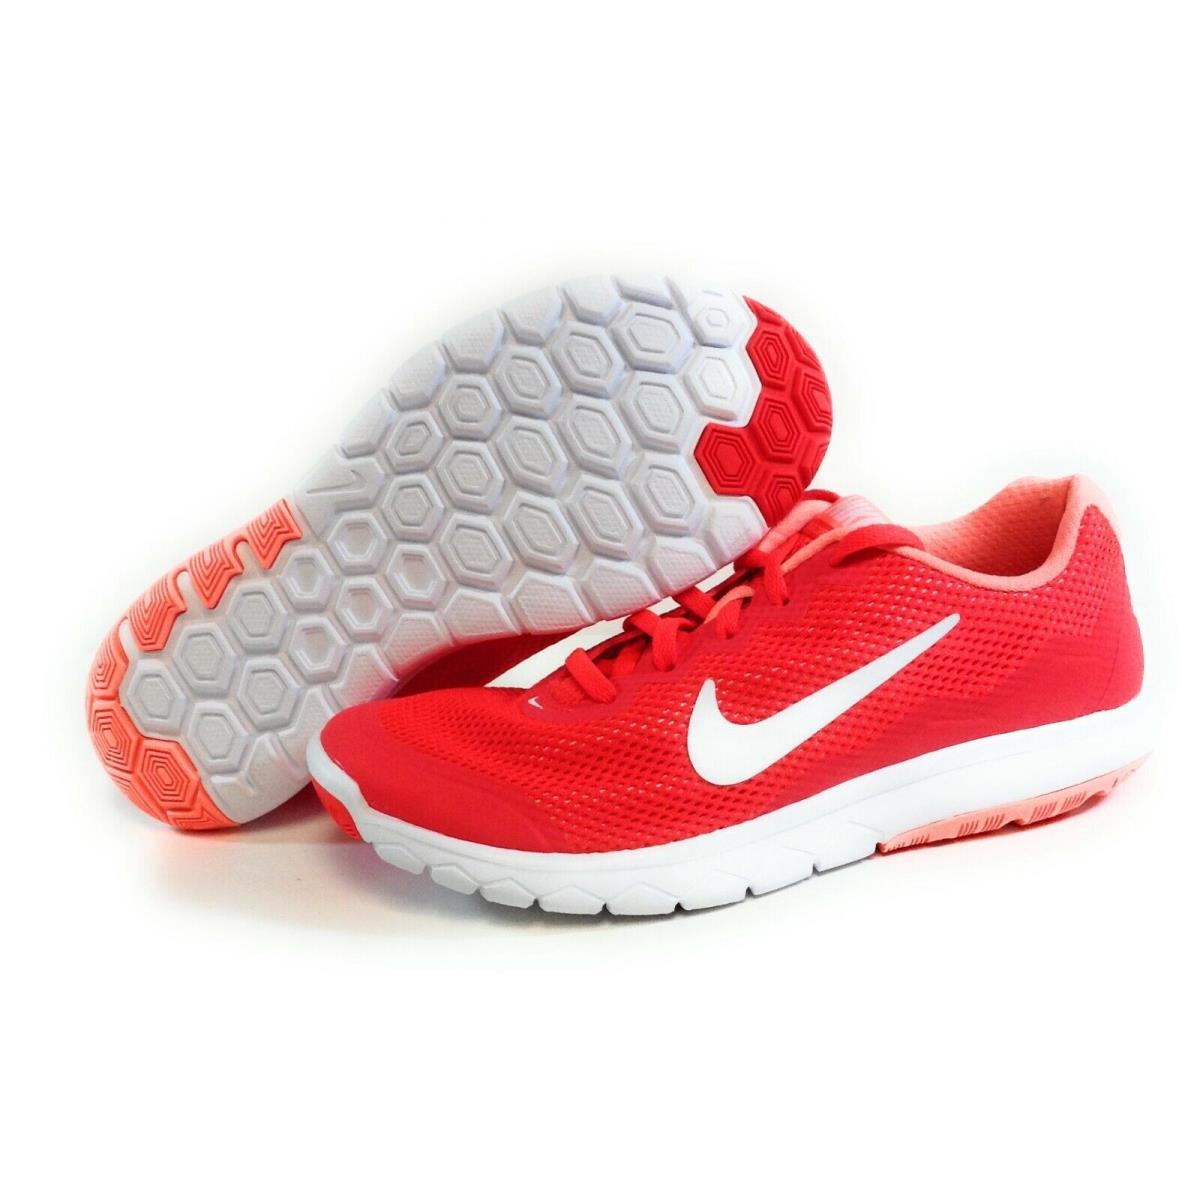 Womens Nike Flex Experience RN 4 749178 602 Coral Red 2015 DS Sneakers Shoes - Crimson